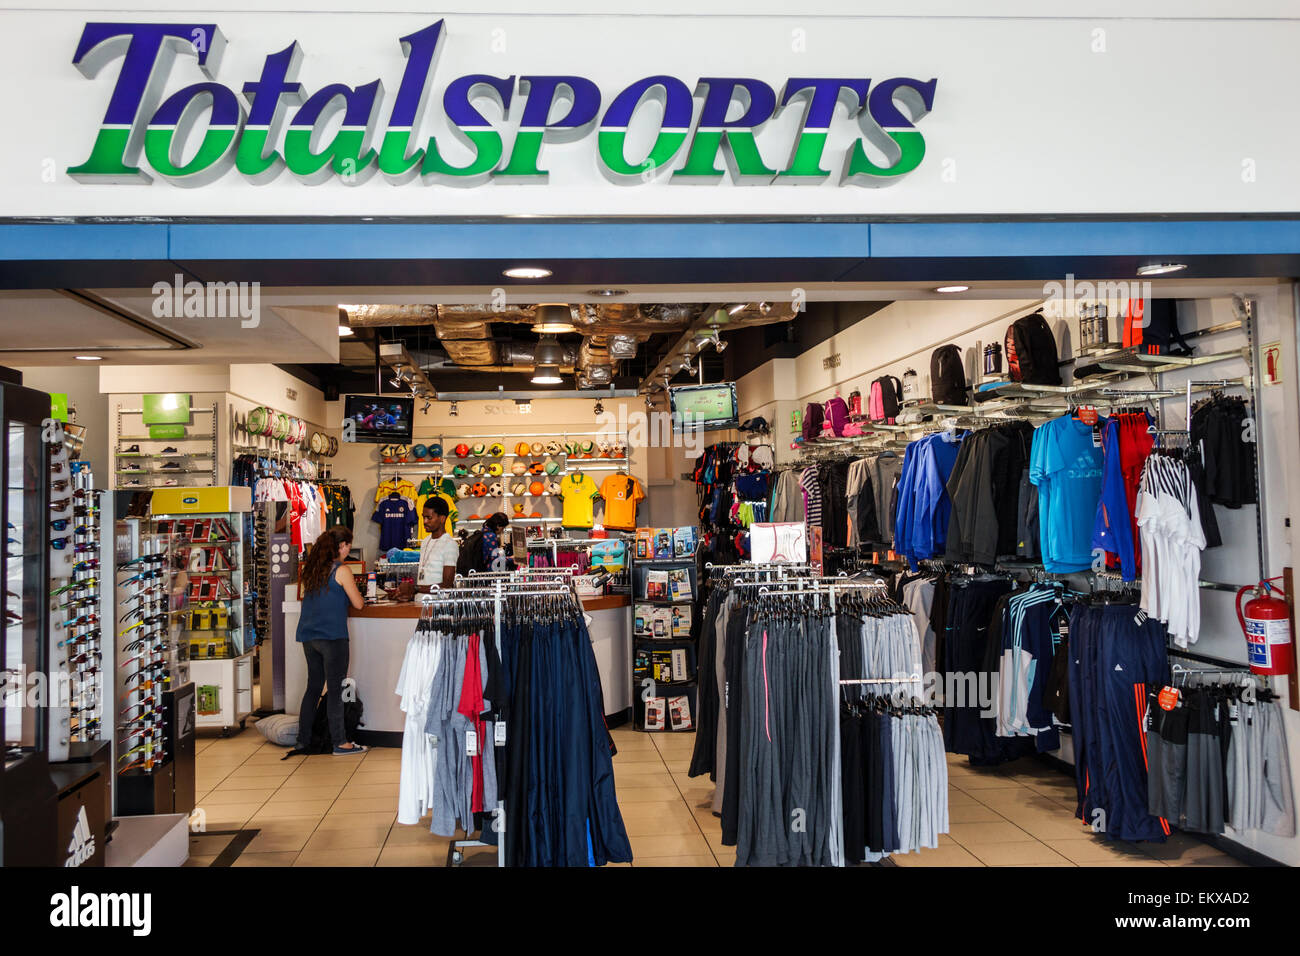 South Africa's leading sports store - Shop online or in-store